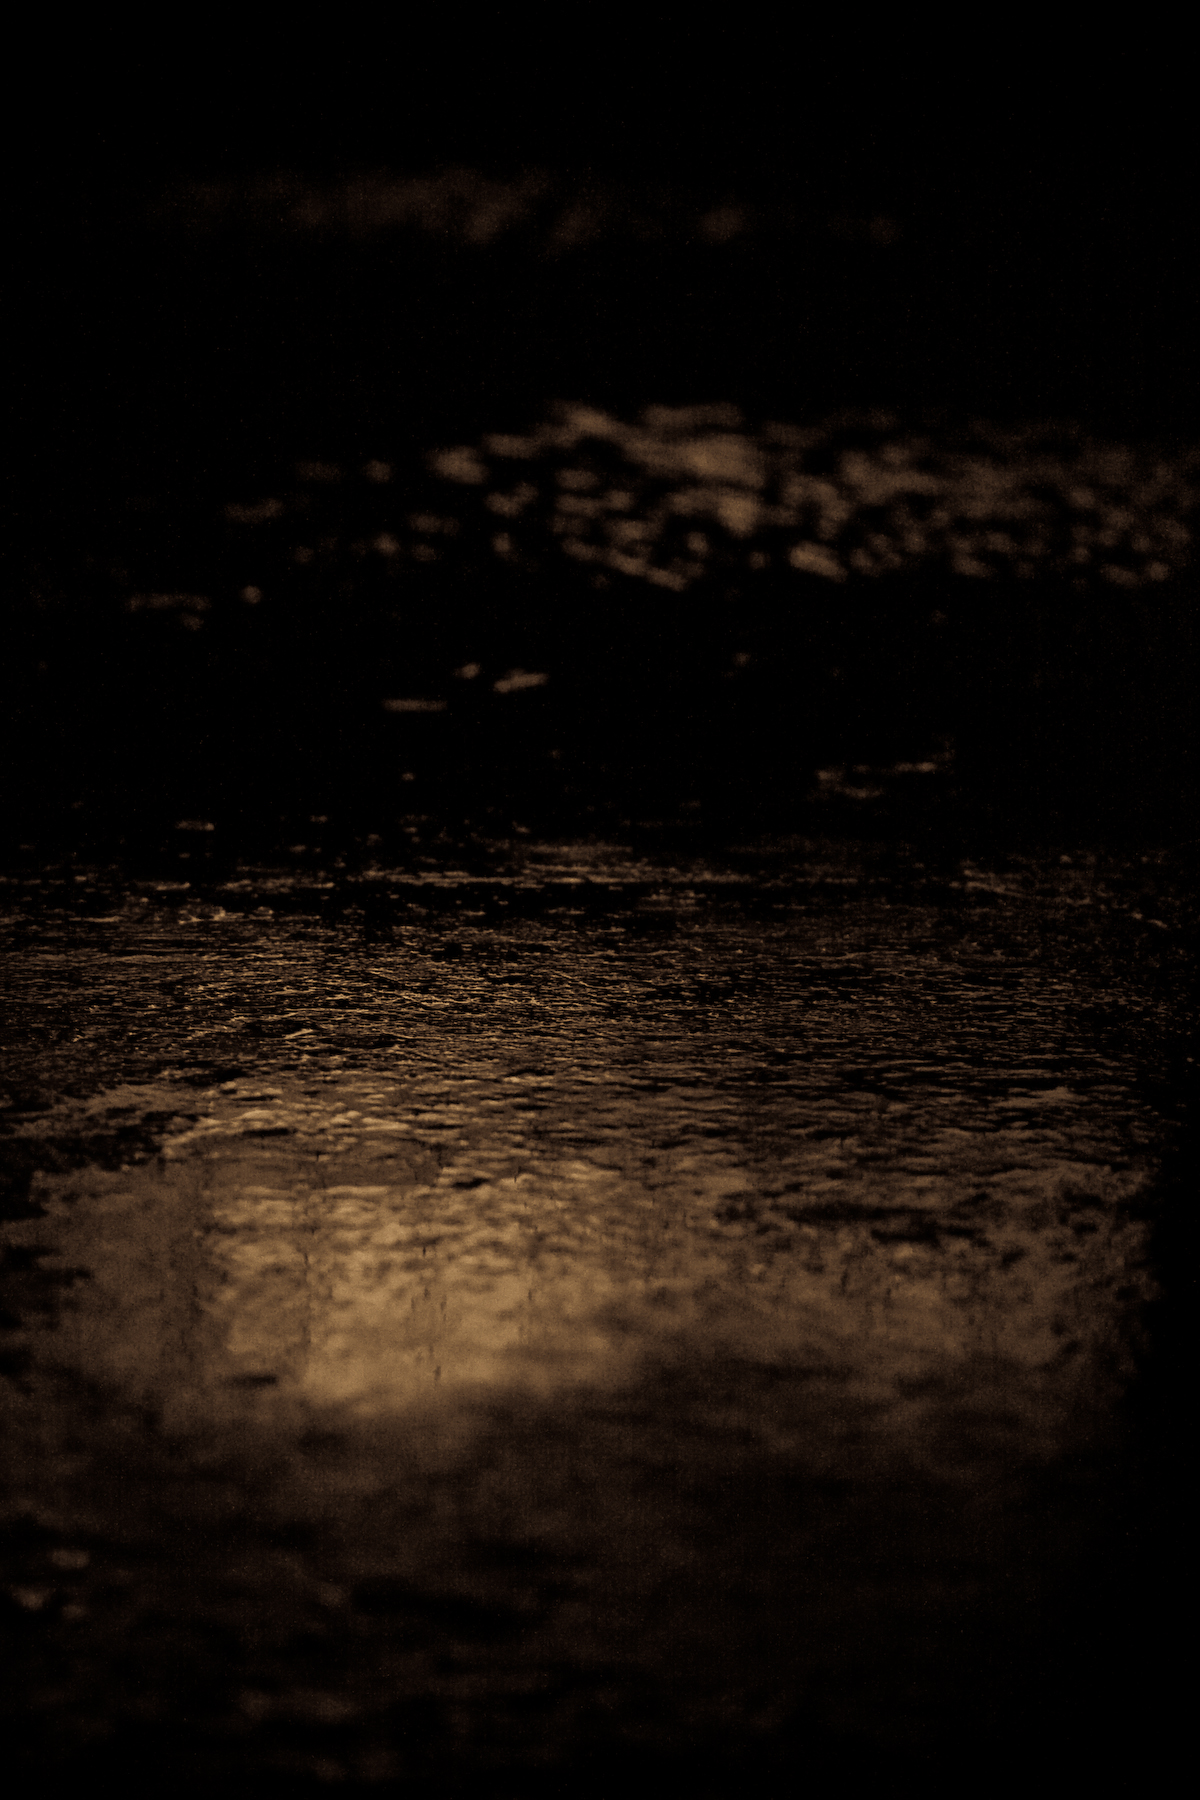 Dark water, Aged, Reflection, Water, Texture, HQ Photo